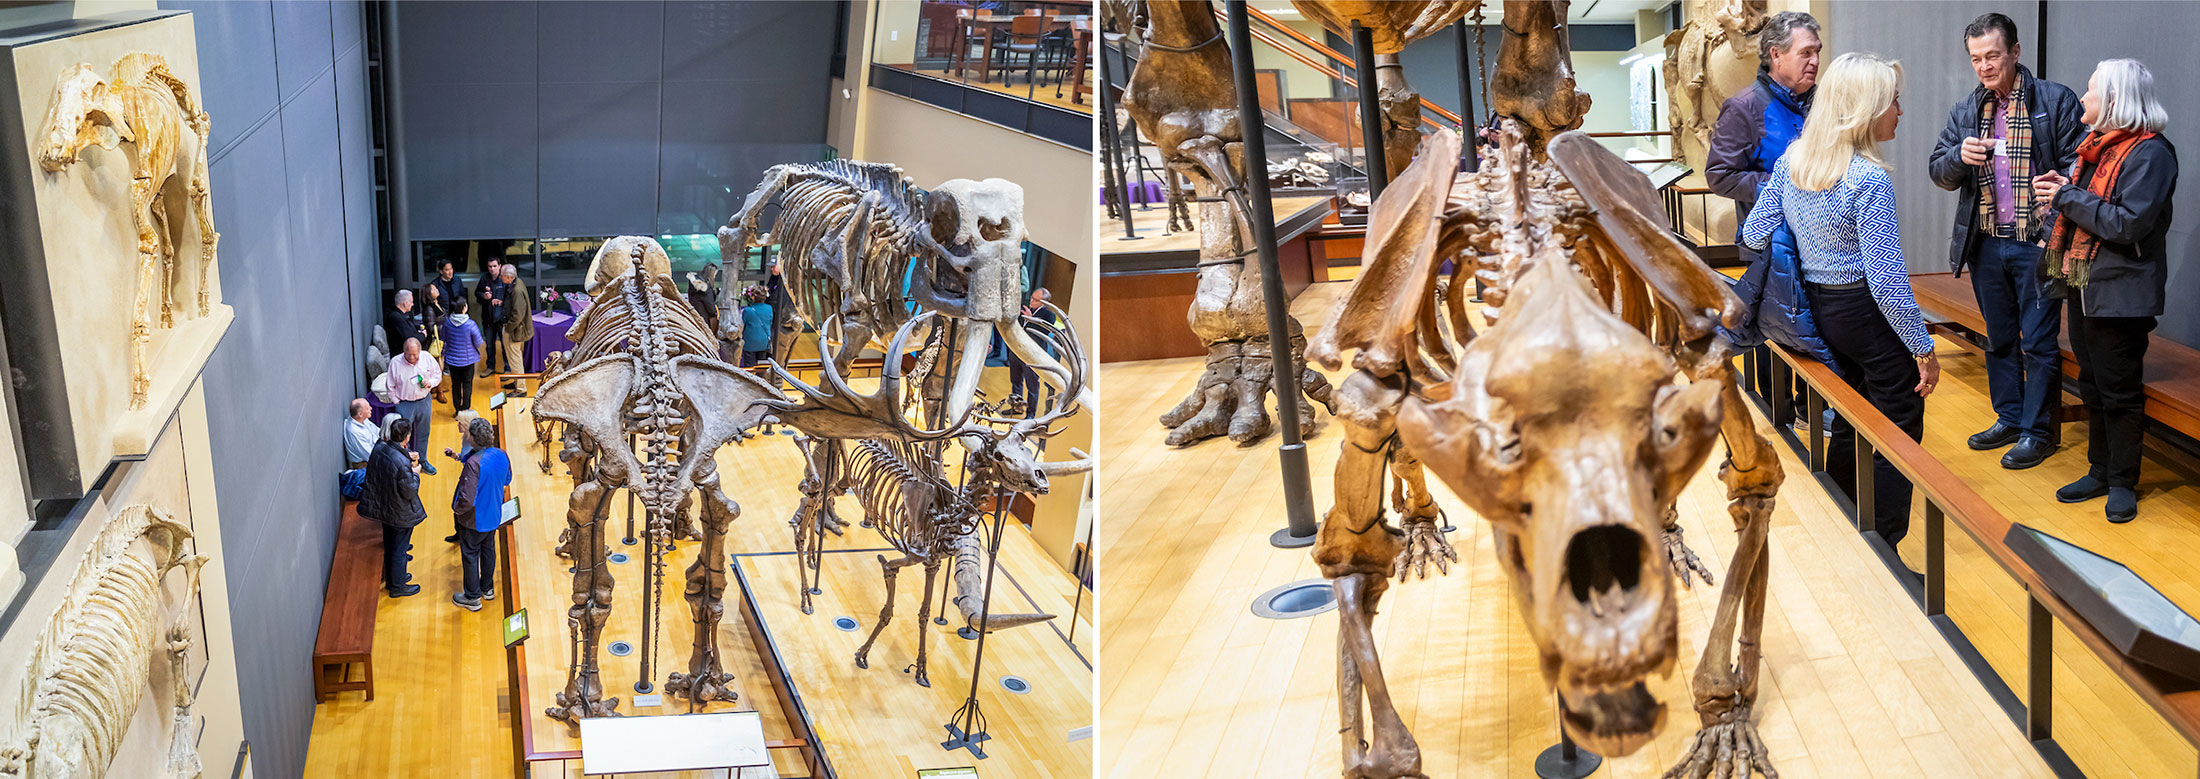 Dinosaur exhibits in the Beneski Museum of Natural History at Amherst College.